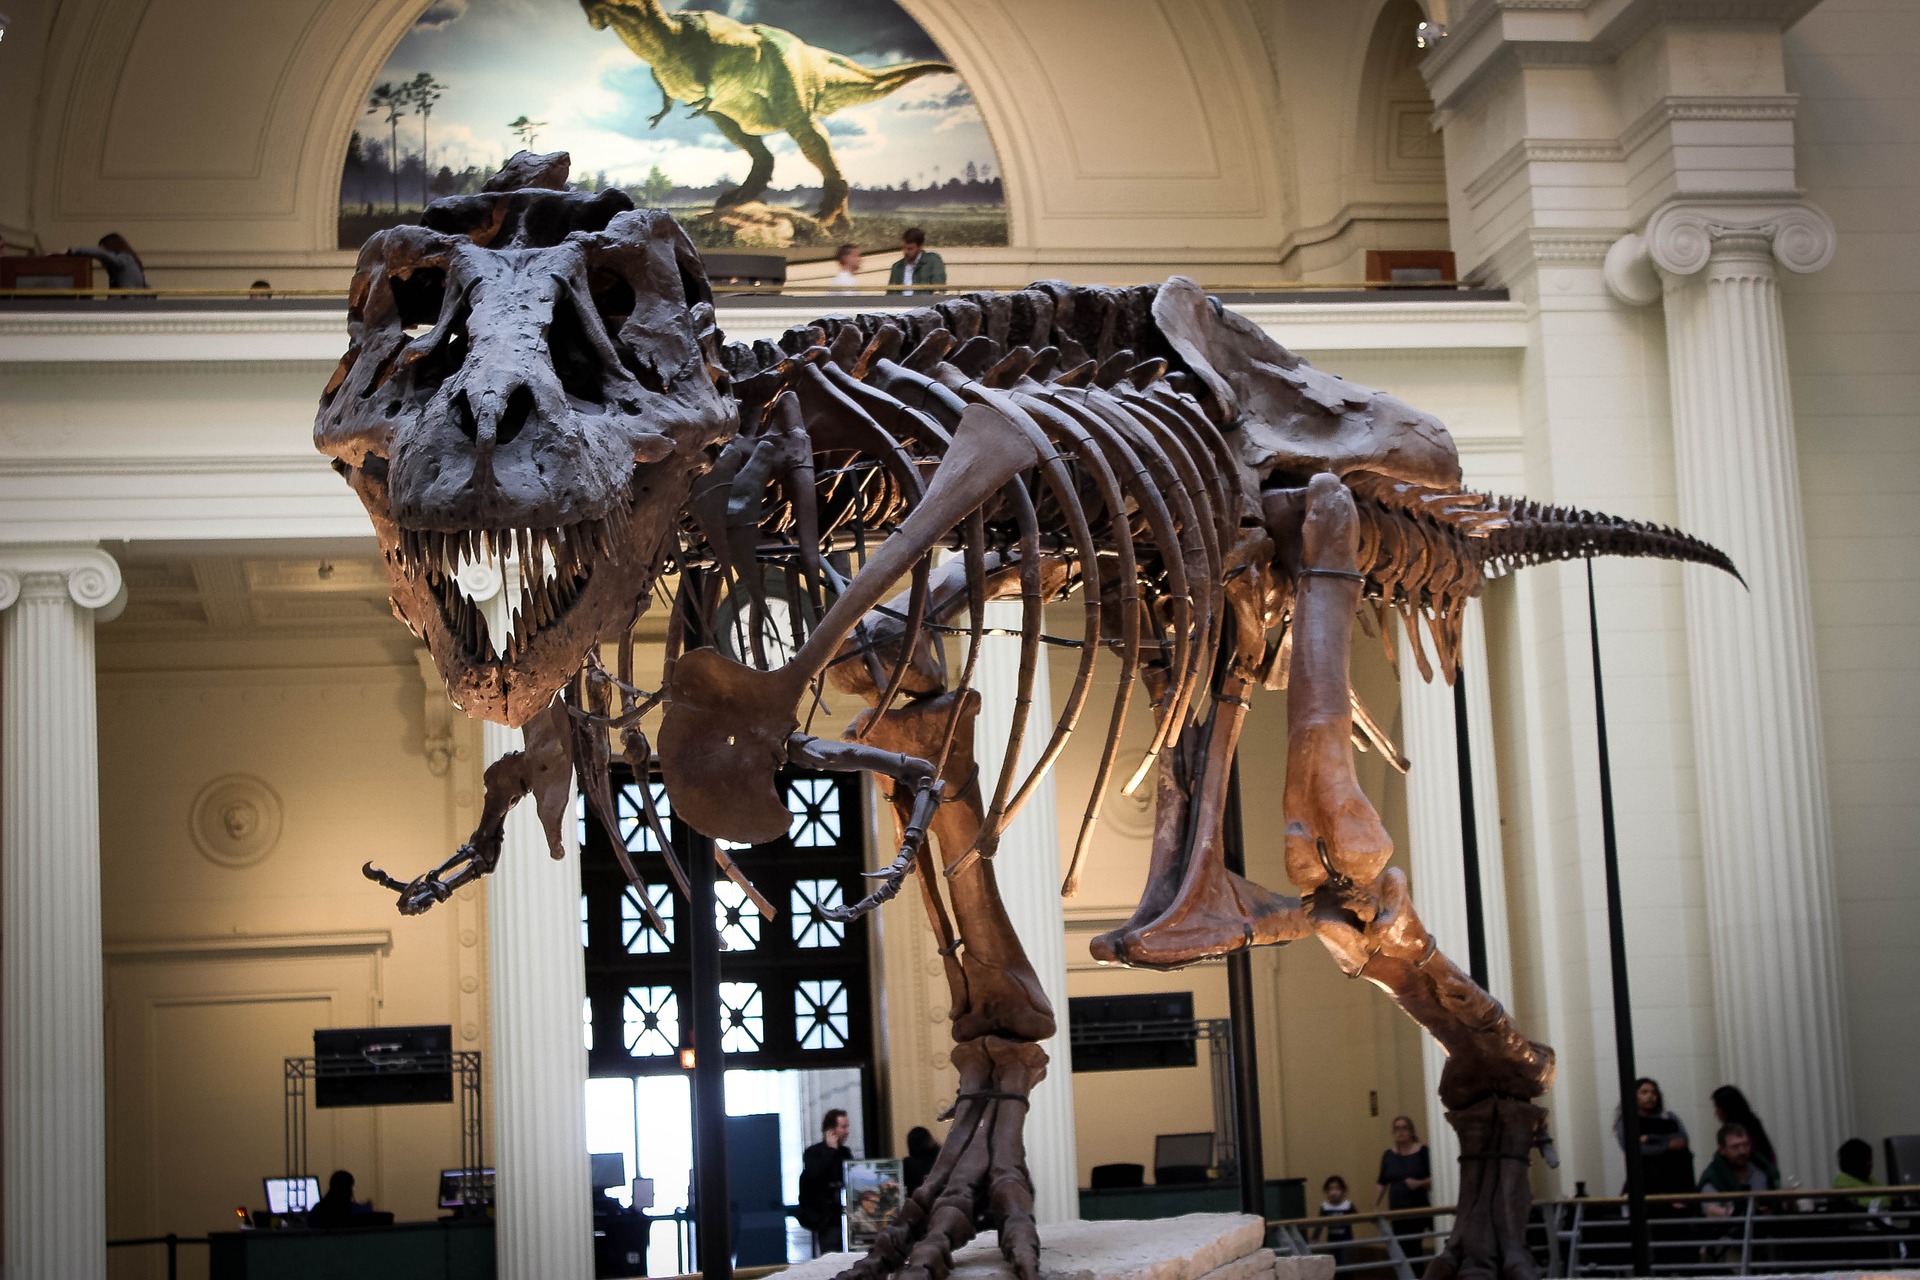 The Largest T-Rex Have Been 70% Bigger Than Previous Record Holder, Scientists Find